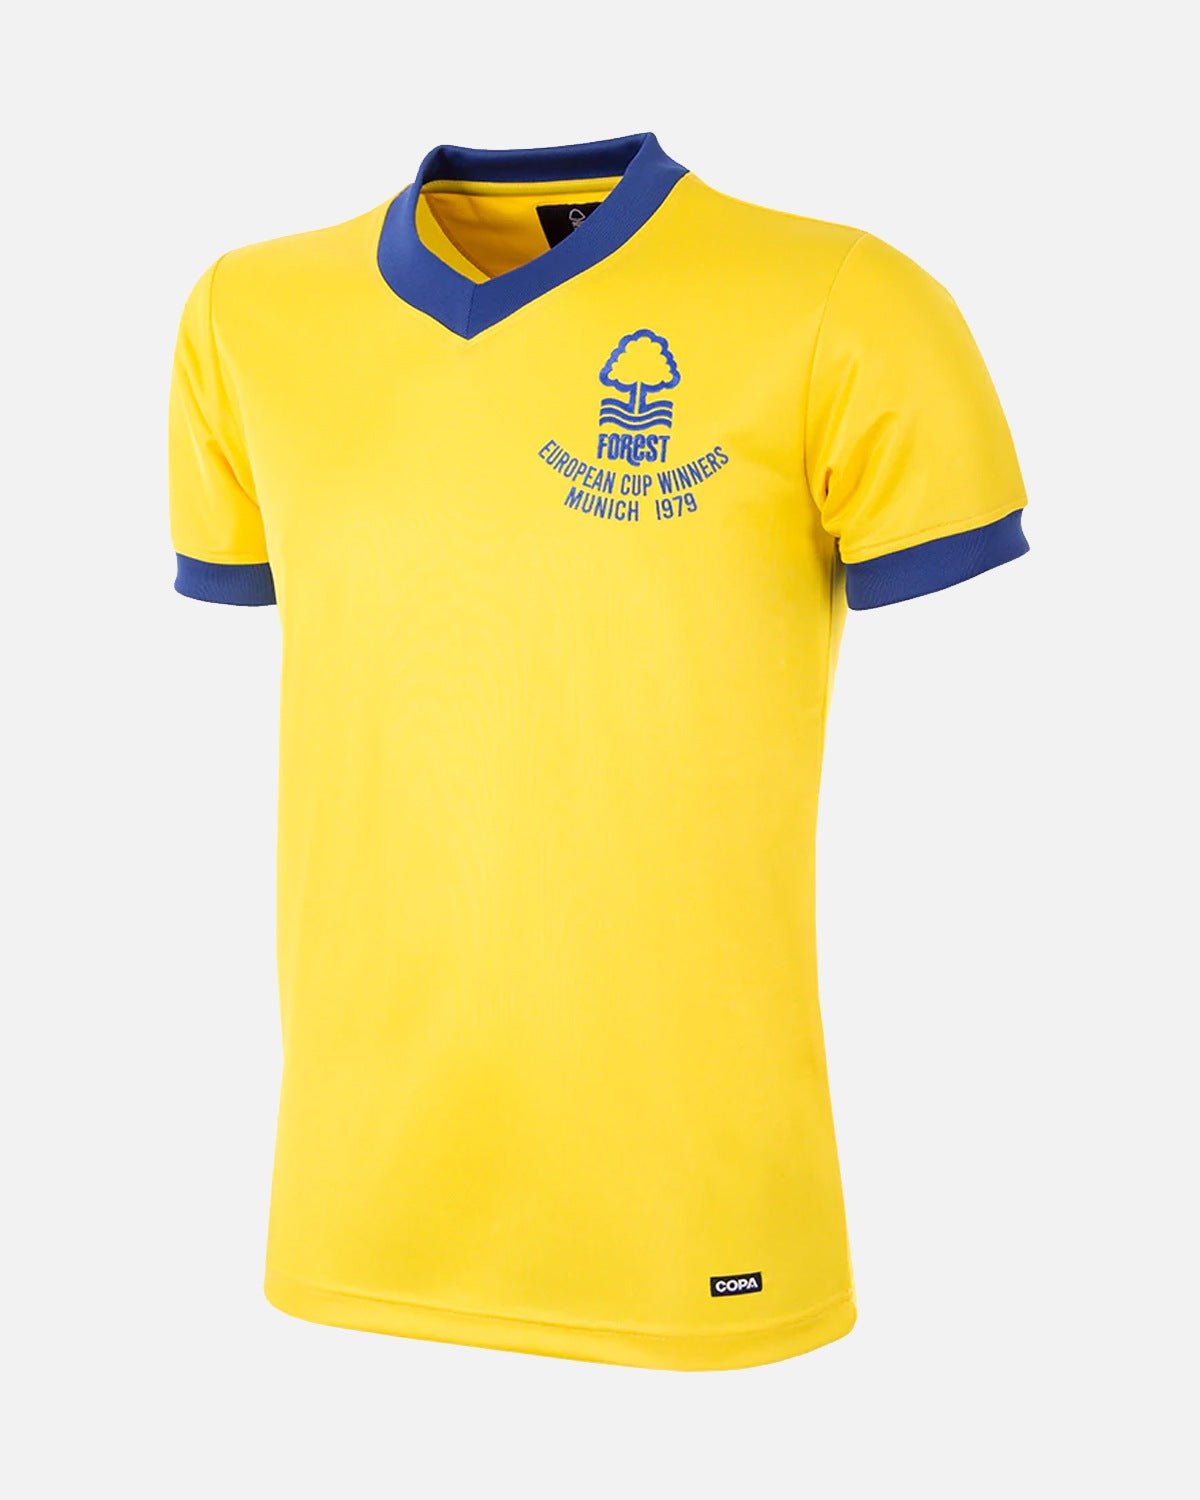 NFFC Adult Retro 1979-1980 European Cup Away Shirt - Nottingham Forest FC